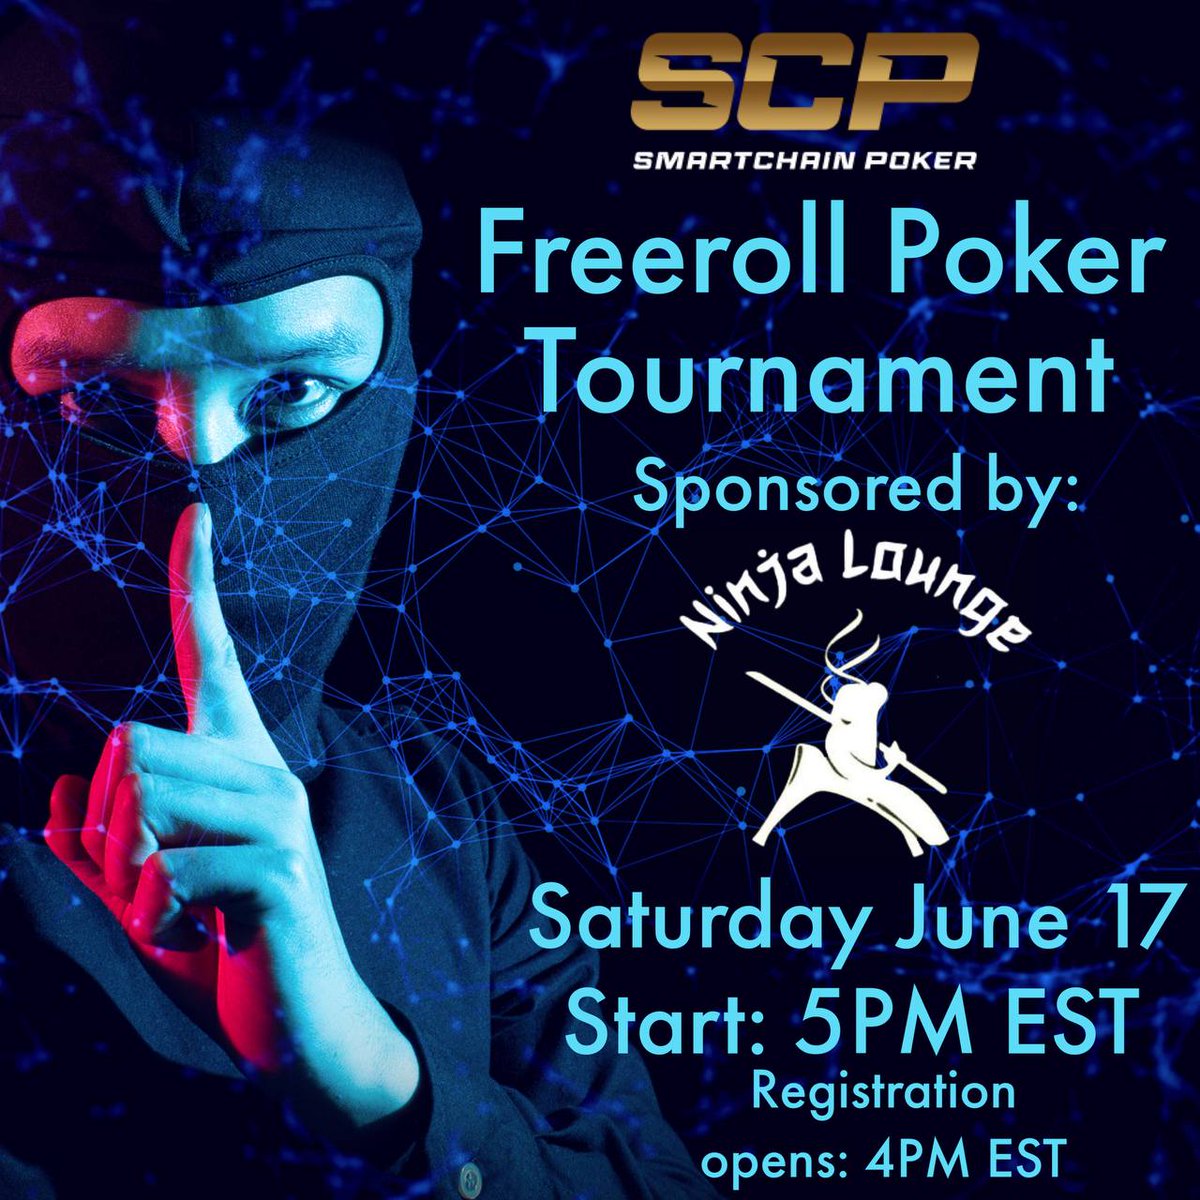 Saturdays are for #ninjas as we welcome back @TheNinjaLounge for another free roll! Go Ninja Go Ninja Go!

#smartchainpoker $SCP #Defi